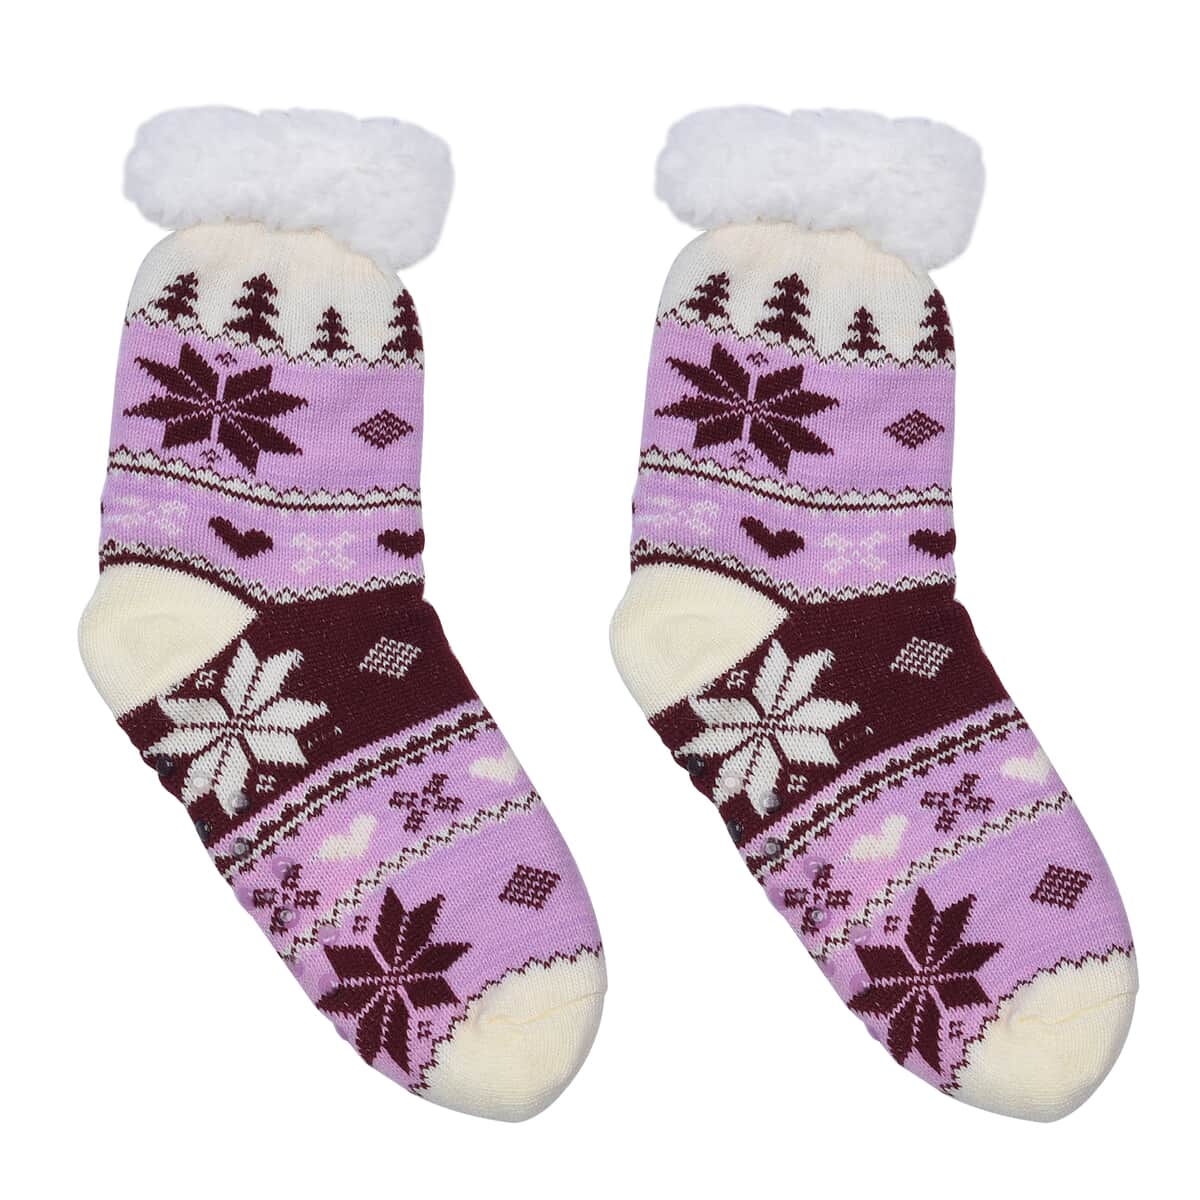 Homesmart Set of 2 Pairs Warm & Fuzzy Red and Brown Snowflake Pattern Sherpa Lined Slipper Socks (Women's Size 5-10) with Anti Slip Rubber image number 1